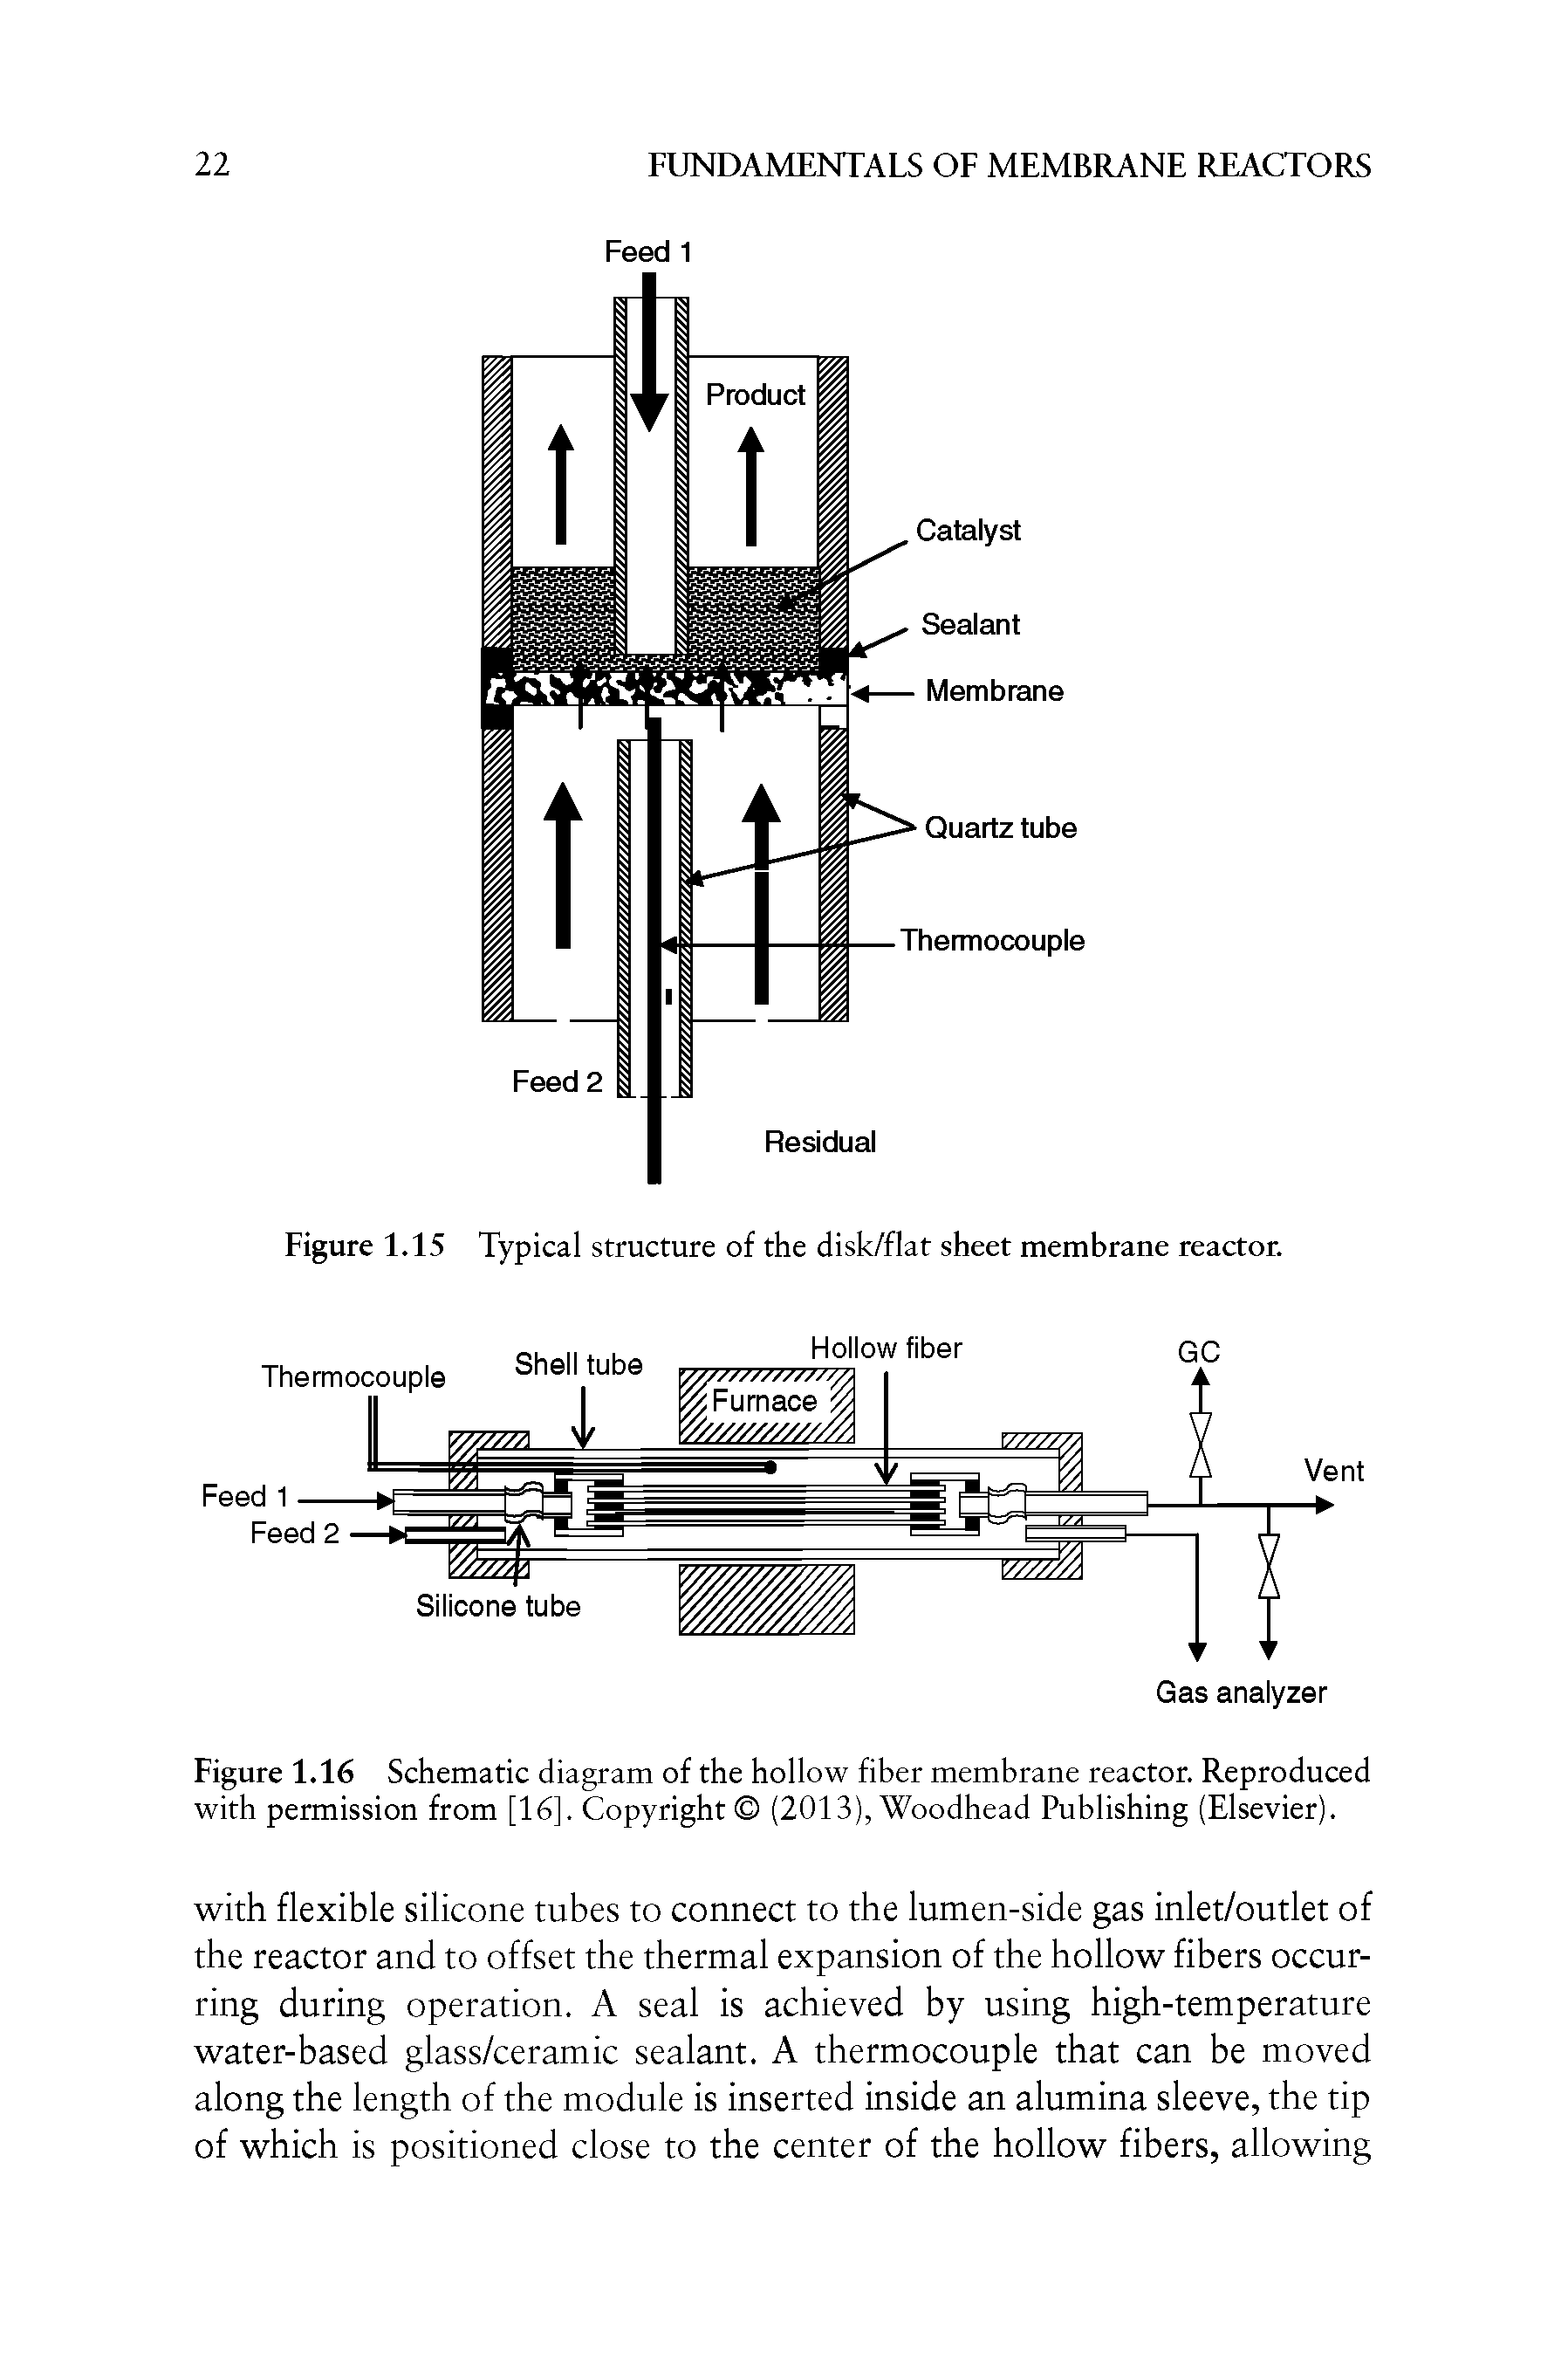 Figure 1.16 Schematic diagram of the hollow fiber membrane reactor. Reproduced with permission from [16], Copyright (2013), Woodhead Publishing (Elsevier).